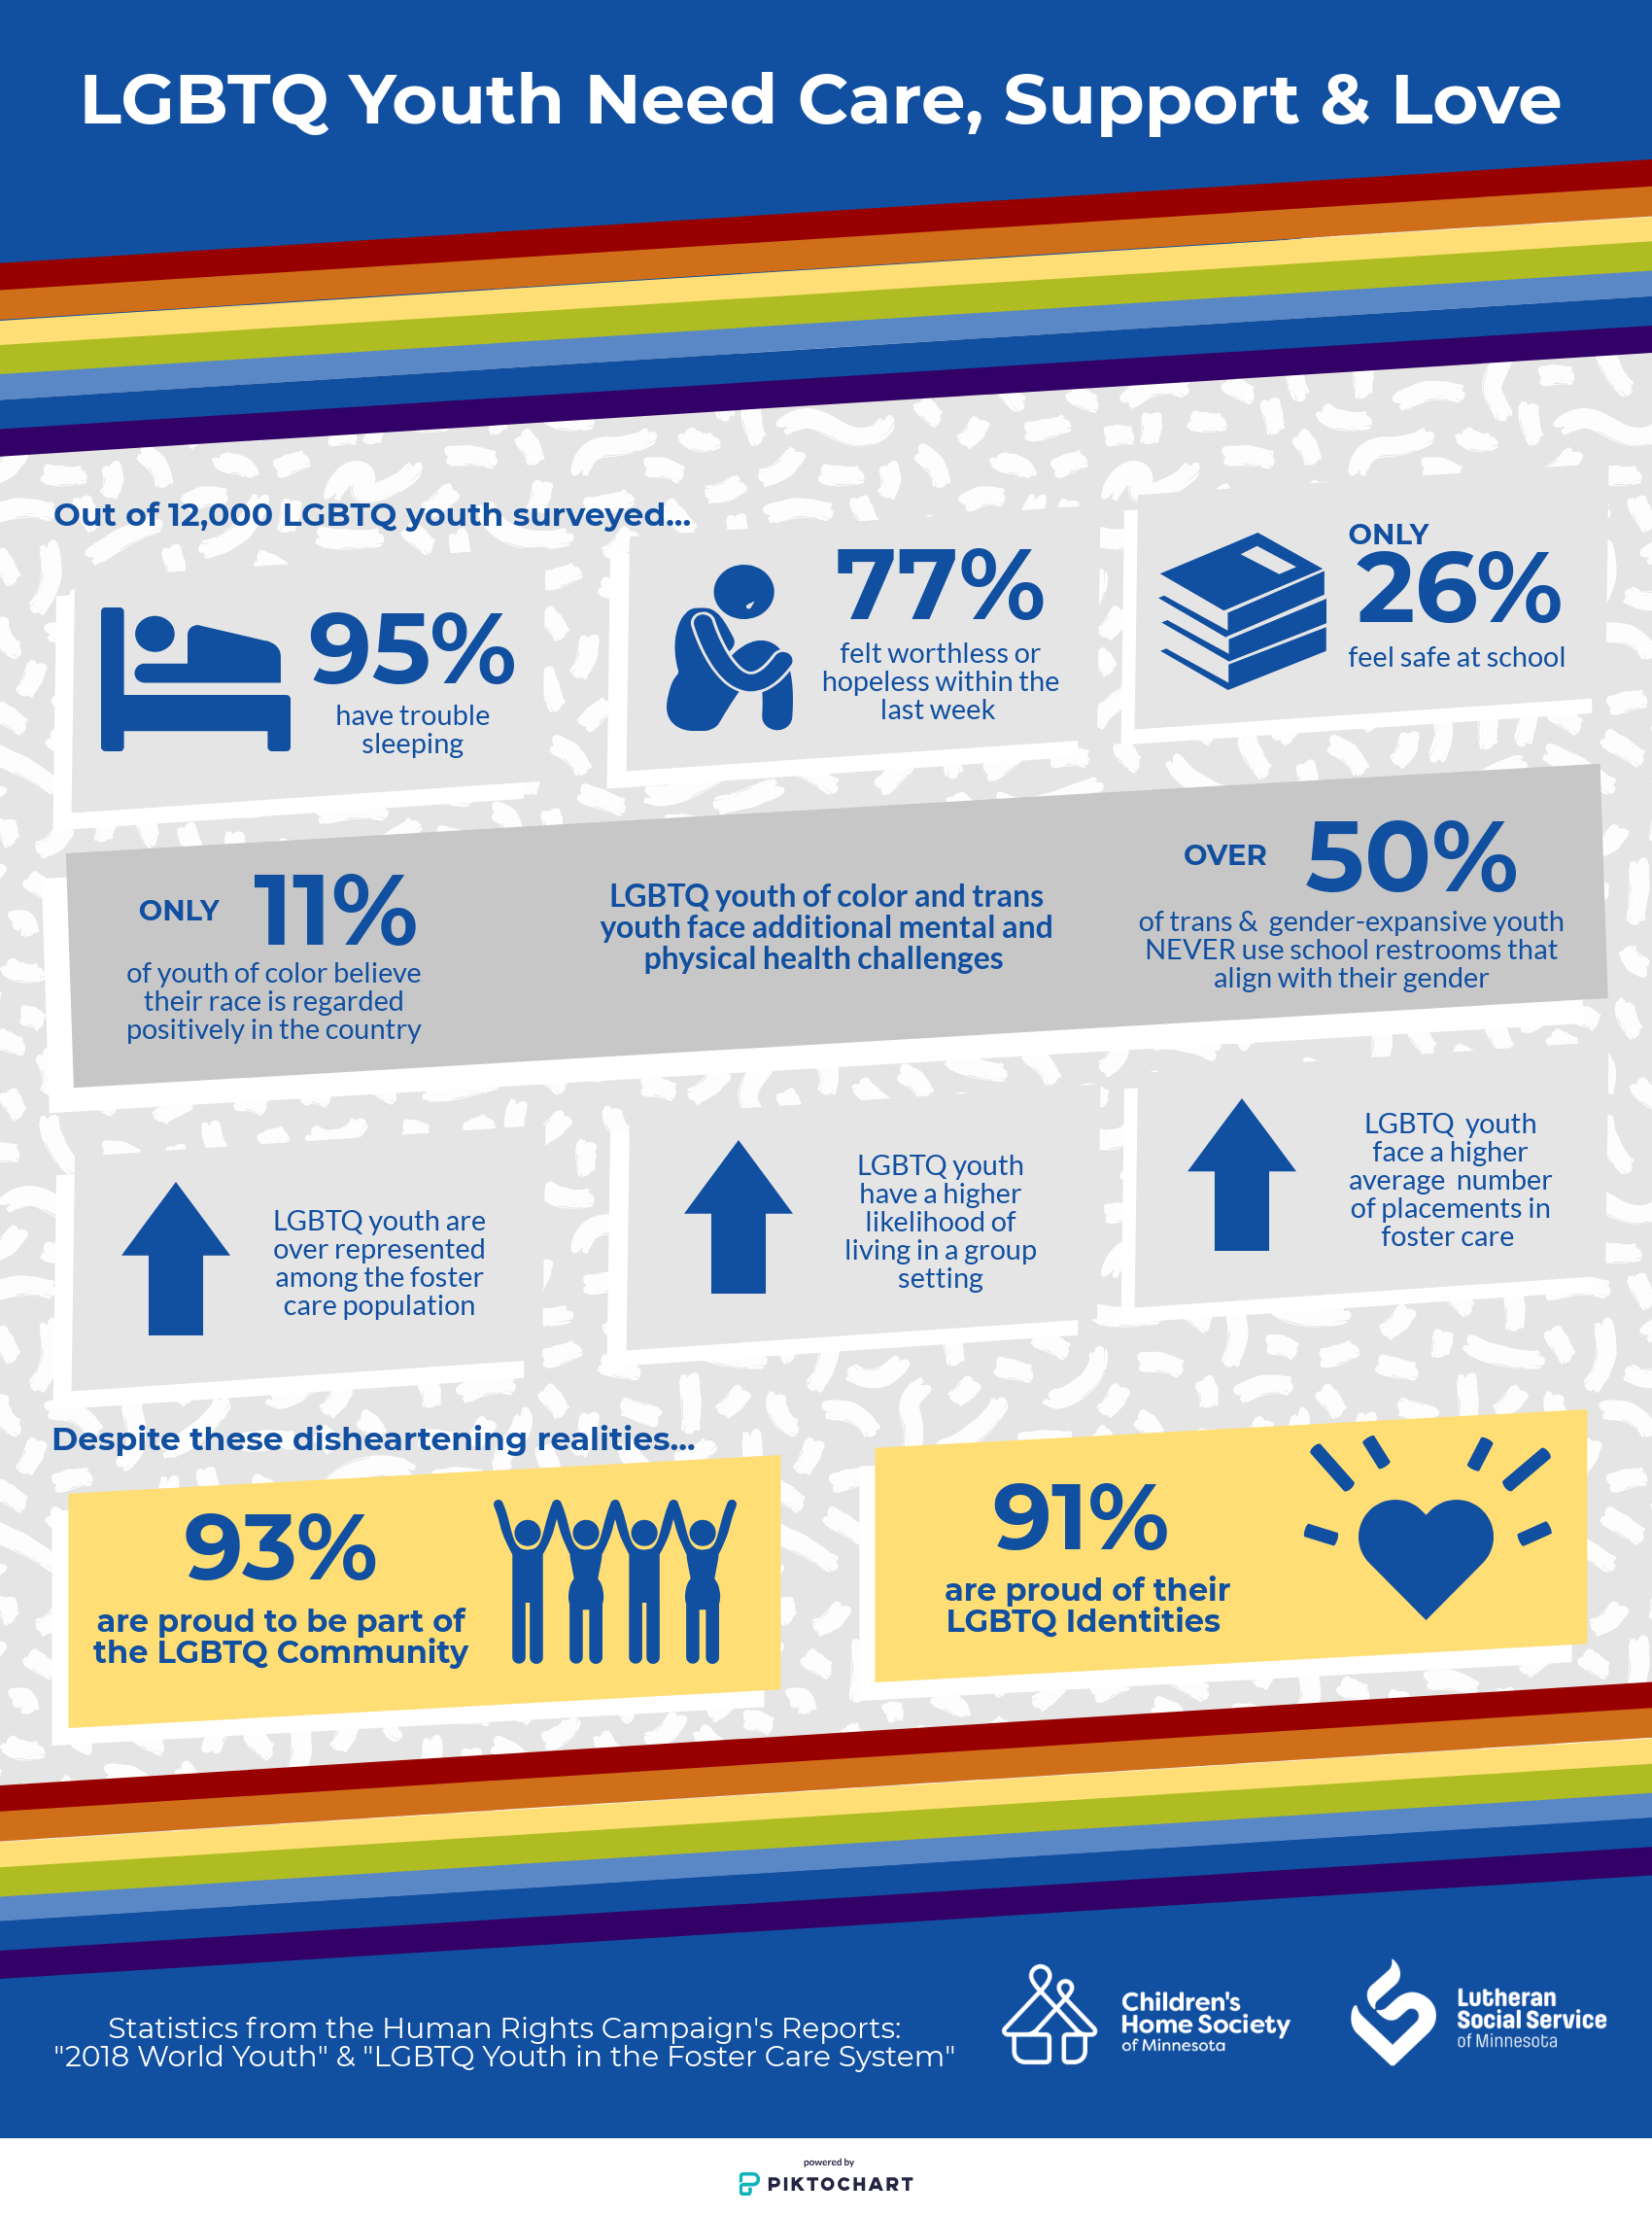 An infographic with stats about the discrimination LGBTQ youth face in their lives and in foster care based of information from Human Rights Campaign.